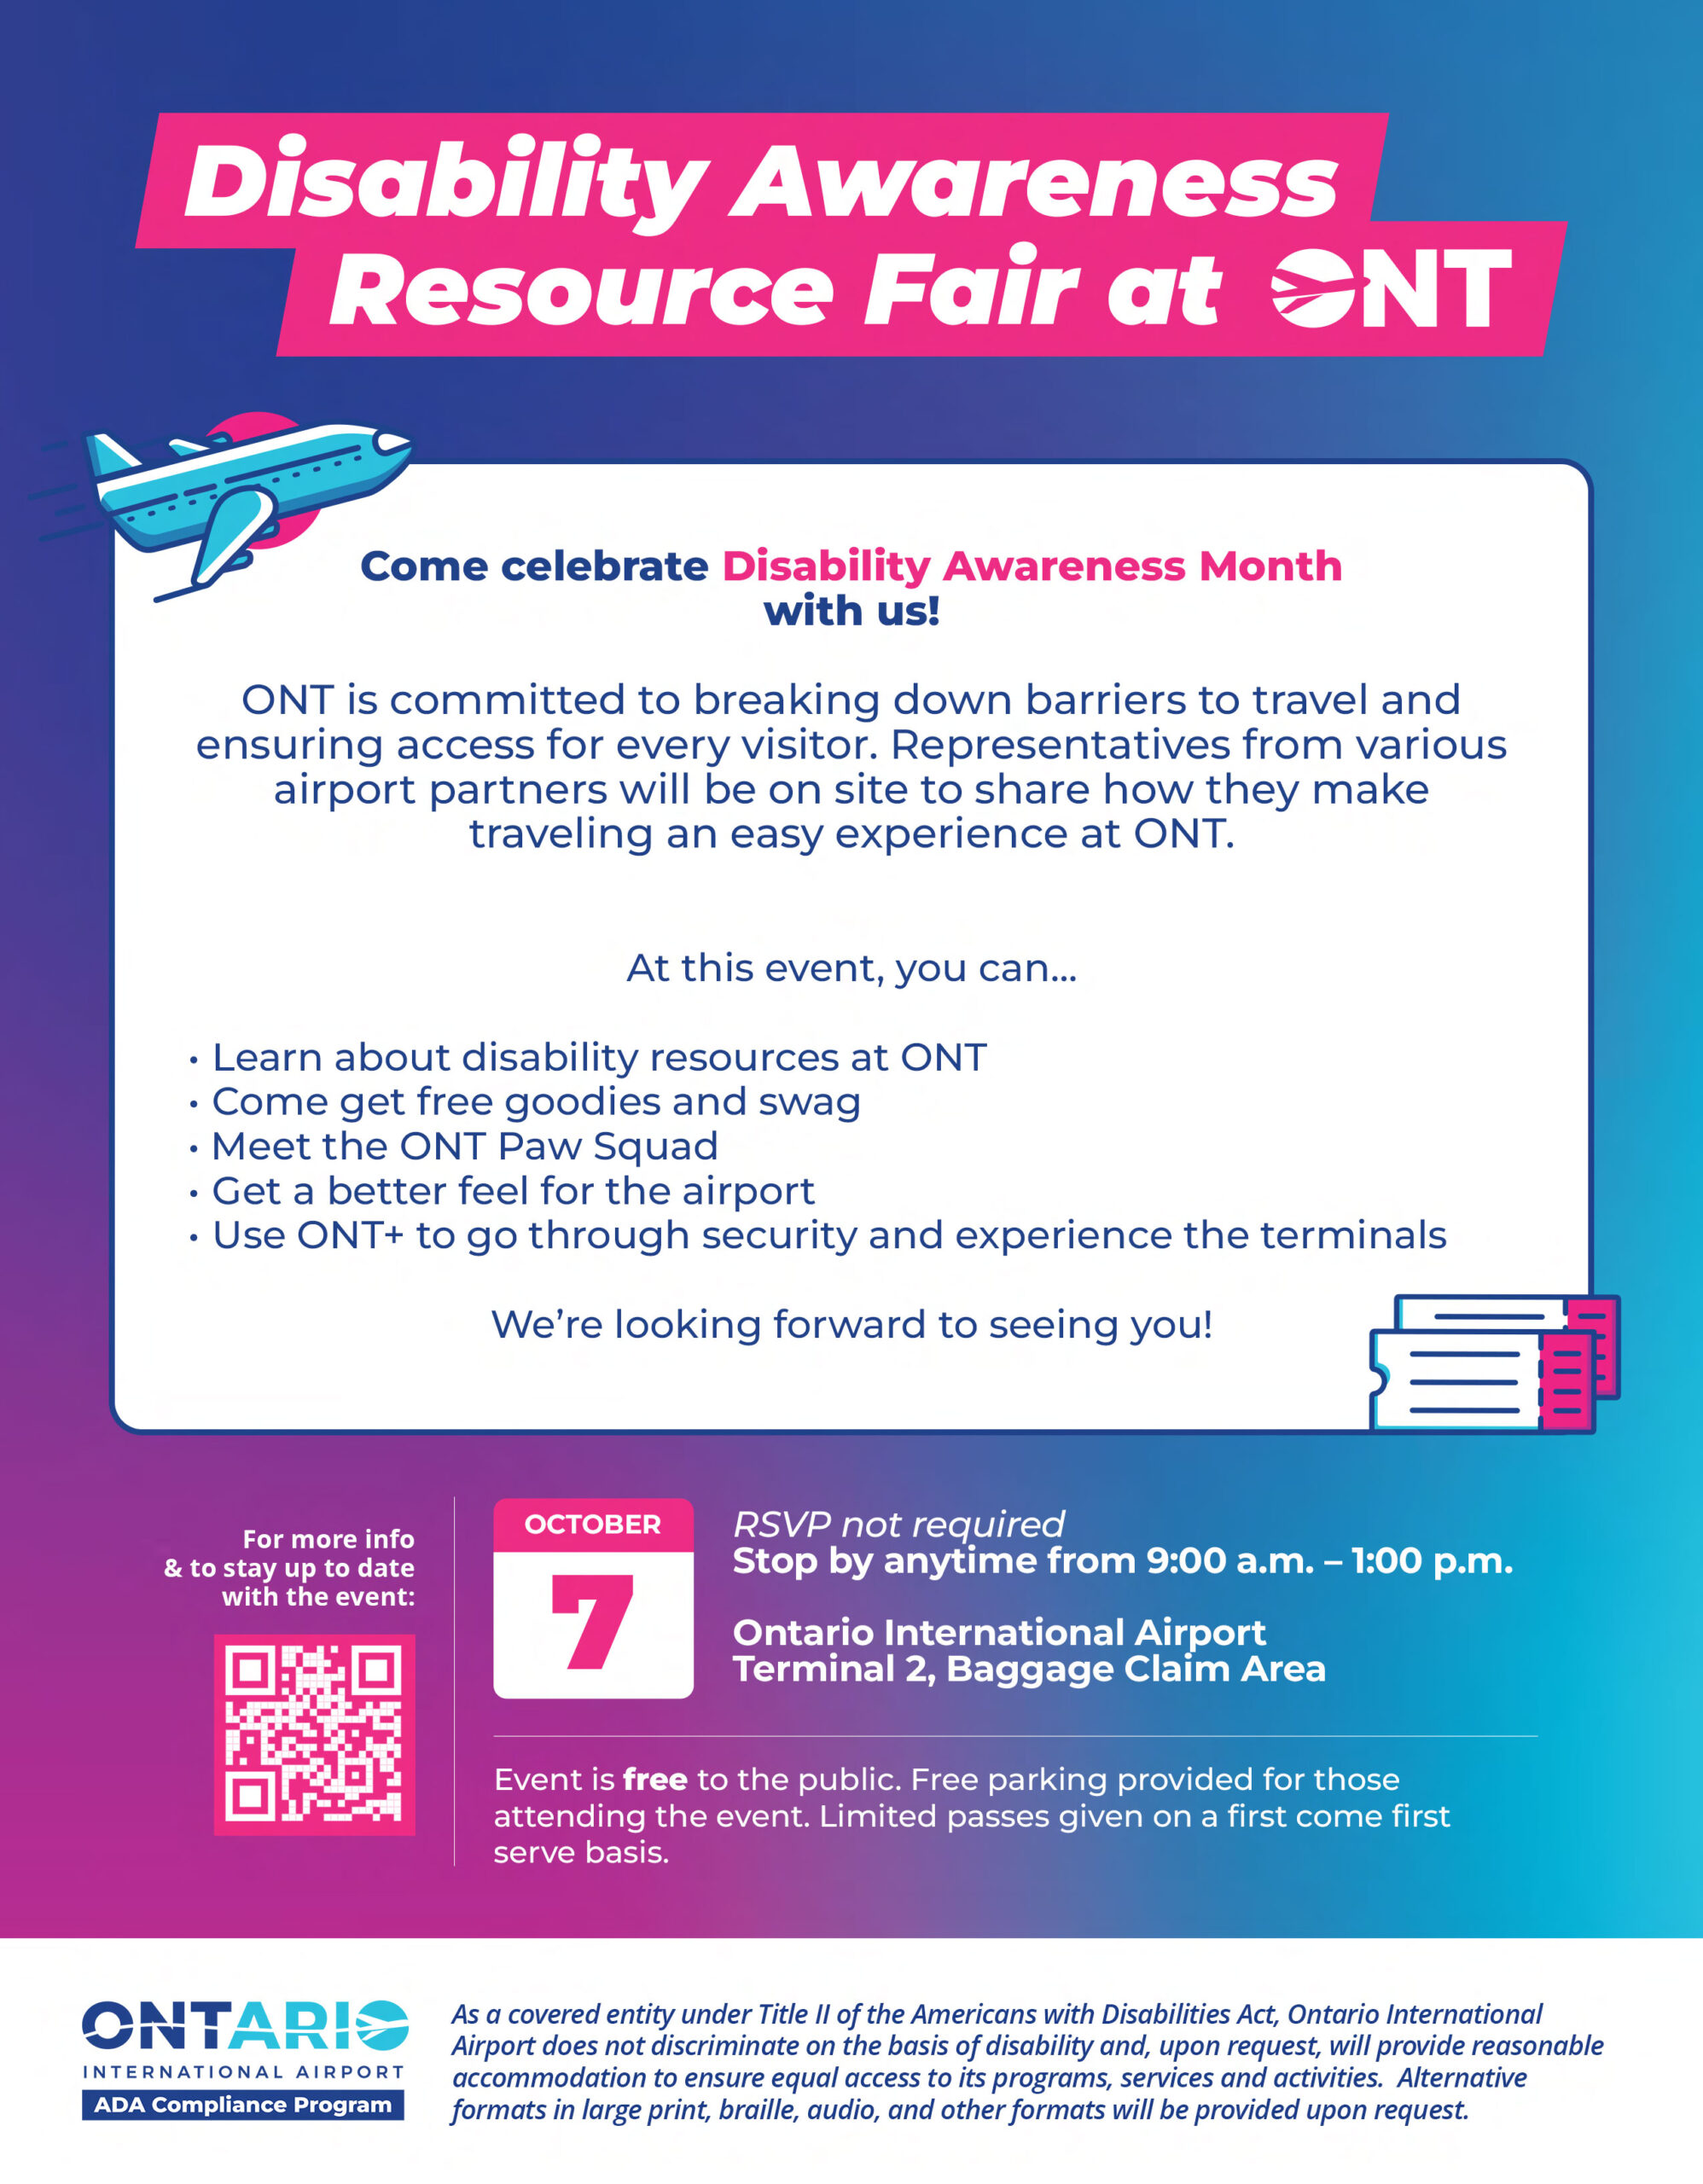 Ontario Airport Disability Resource Fair for October 7